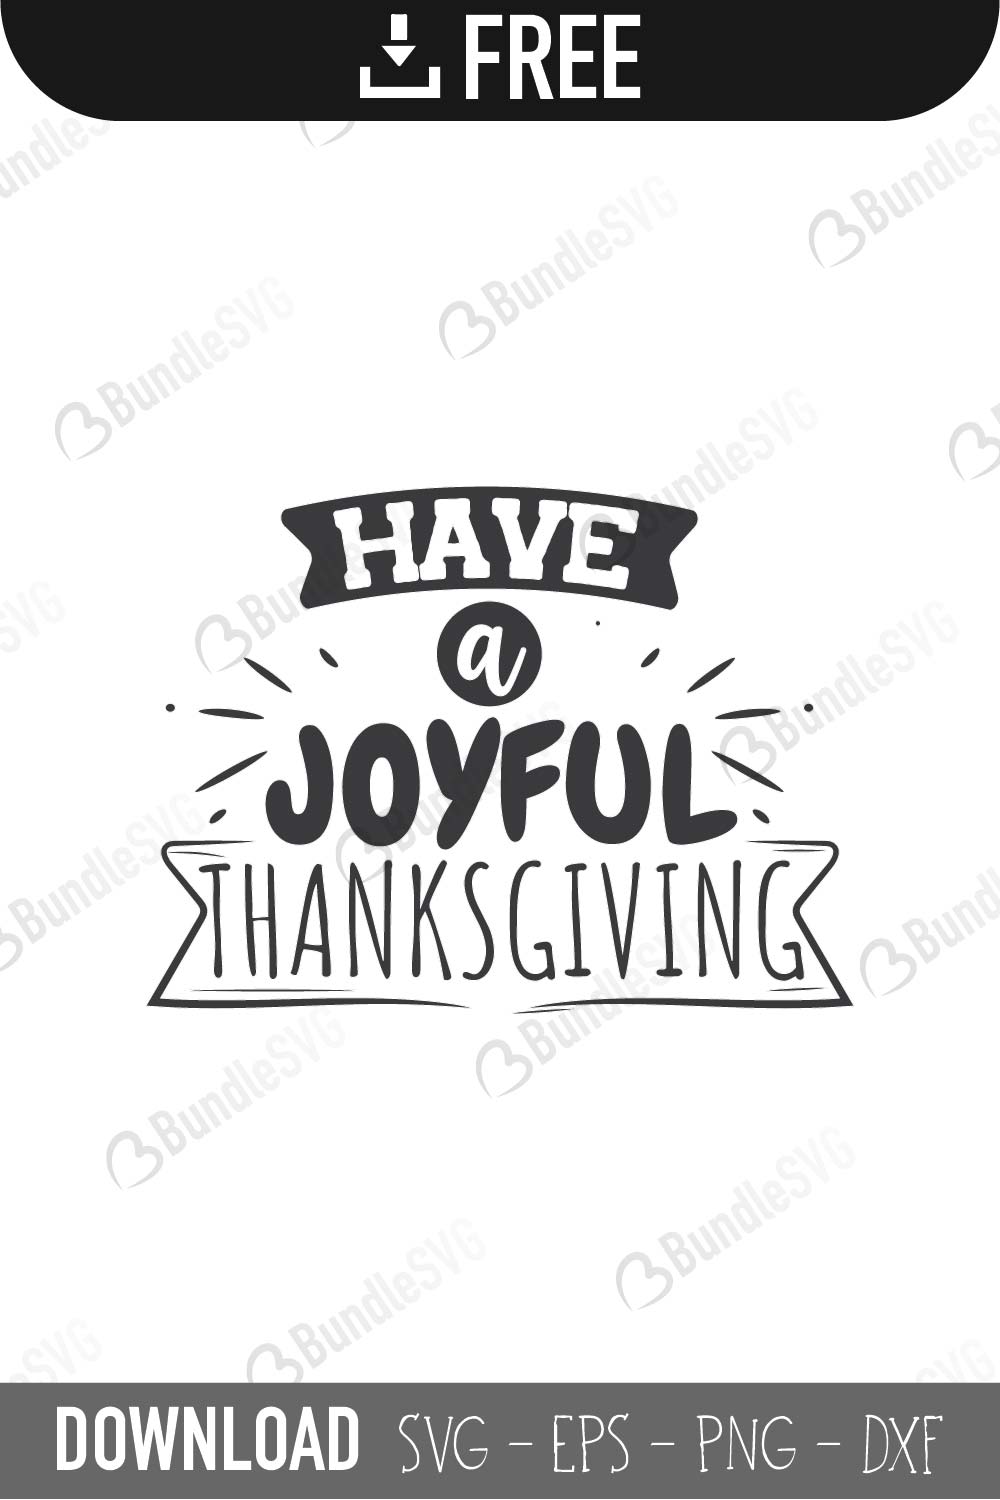 Download Thanksgiving 2020 Svg Covid 19 Homeschool Academy Class Of 2020 Svg File Created To Sew SVG Cut Files